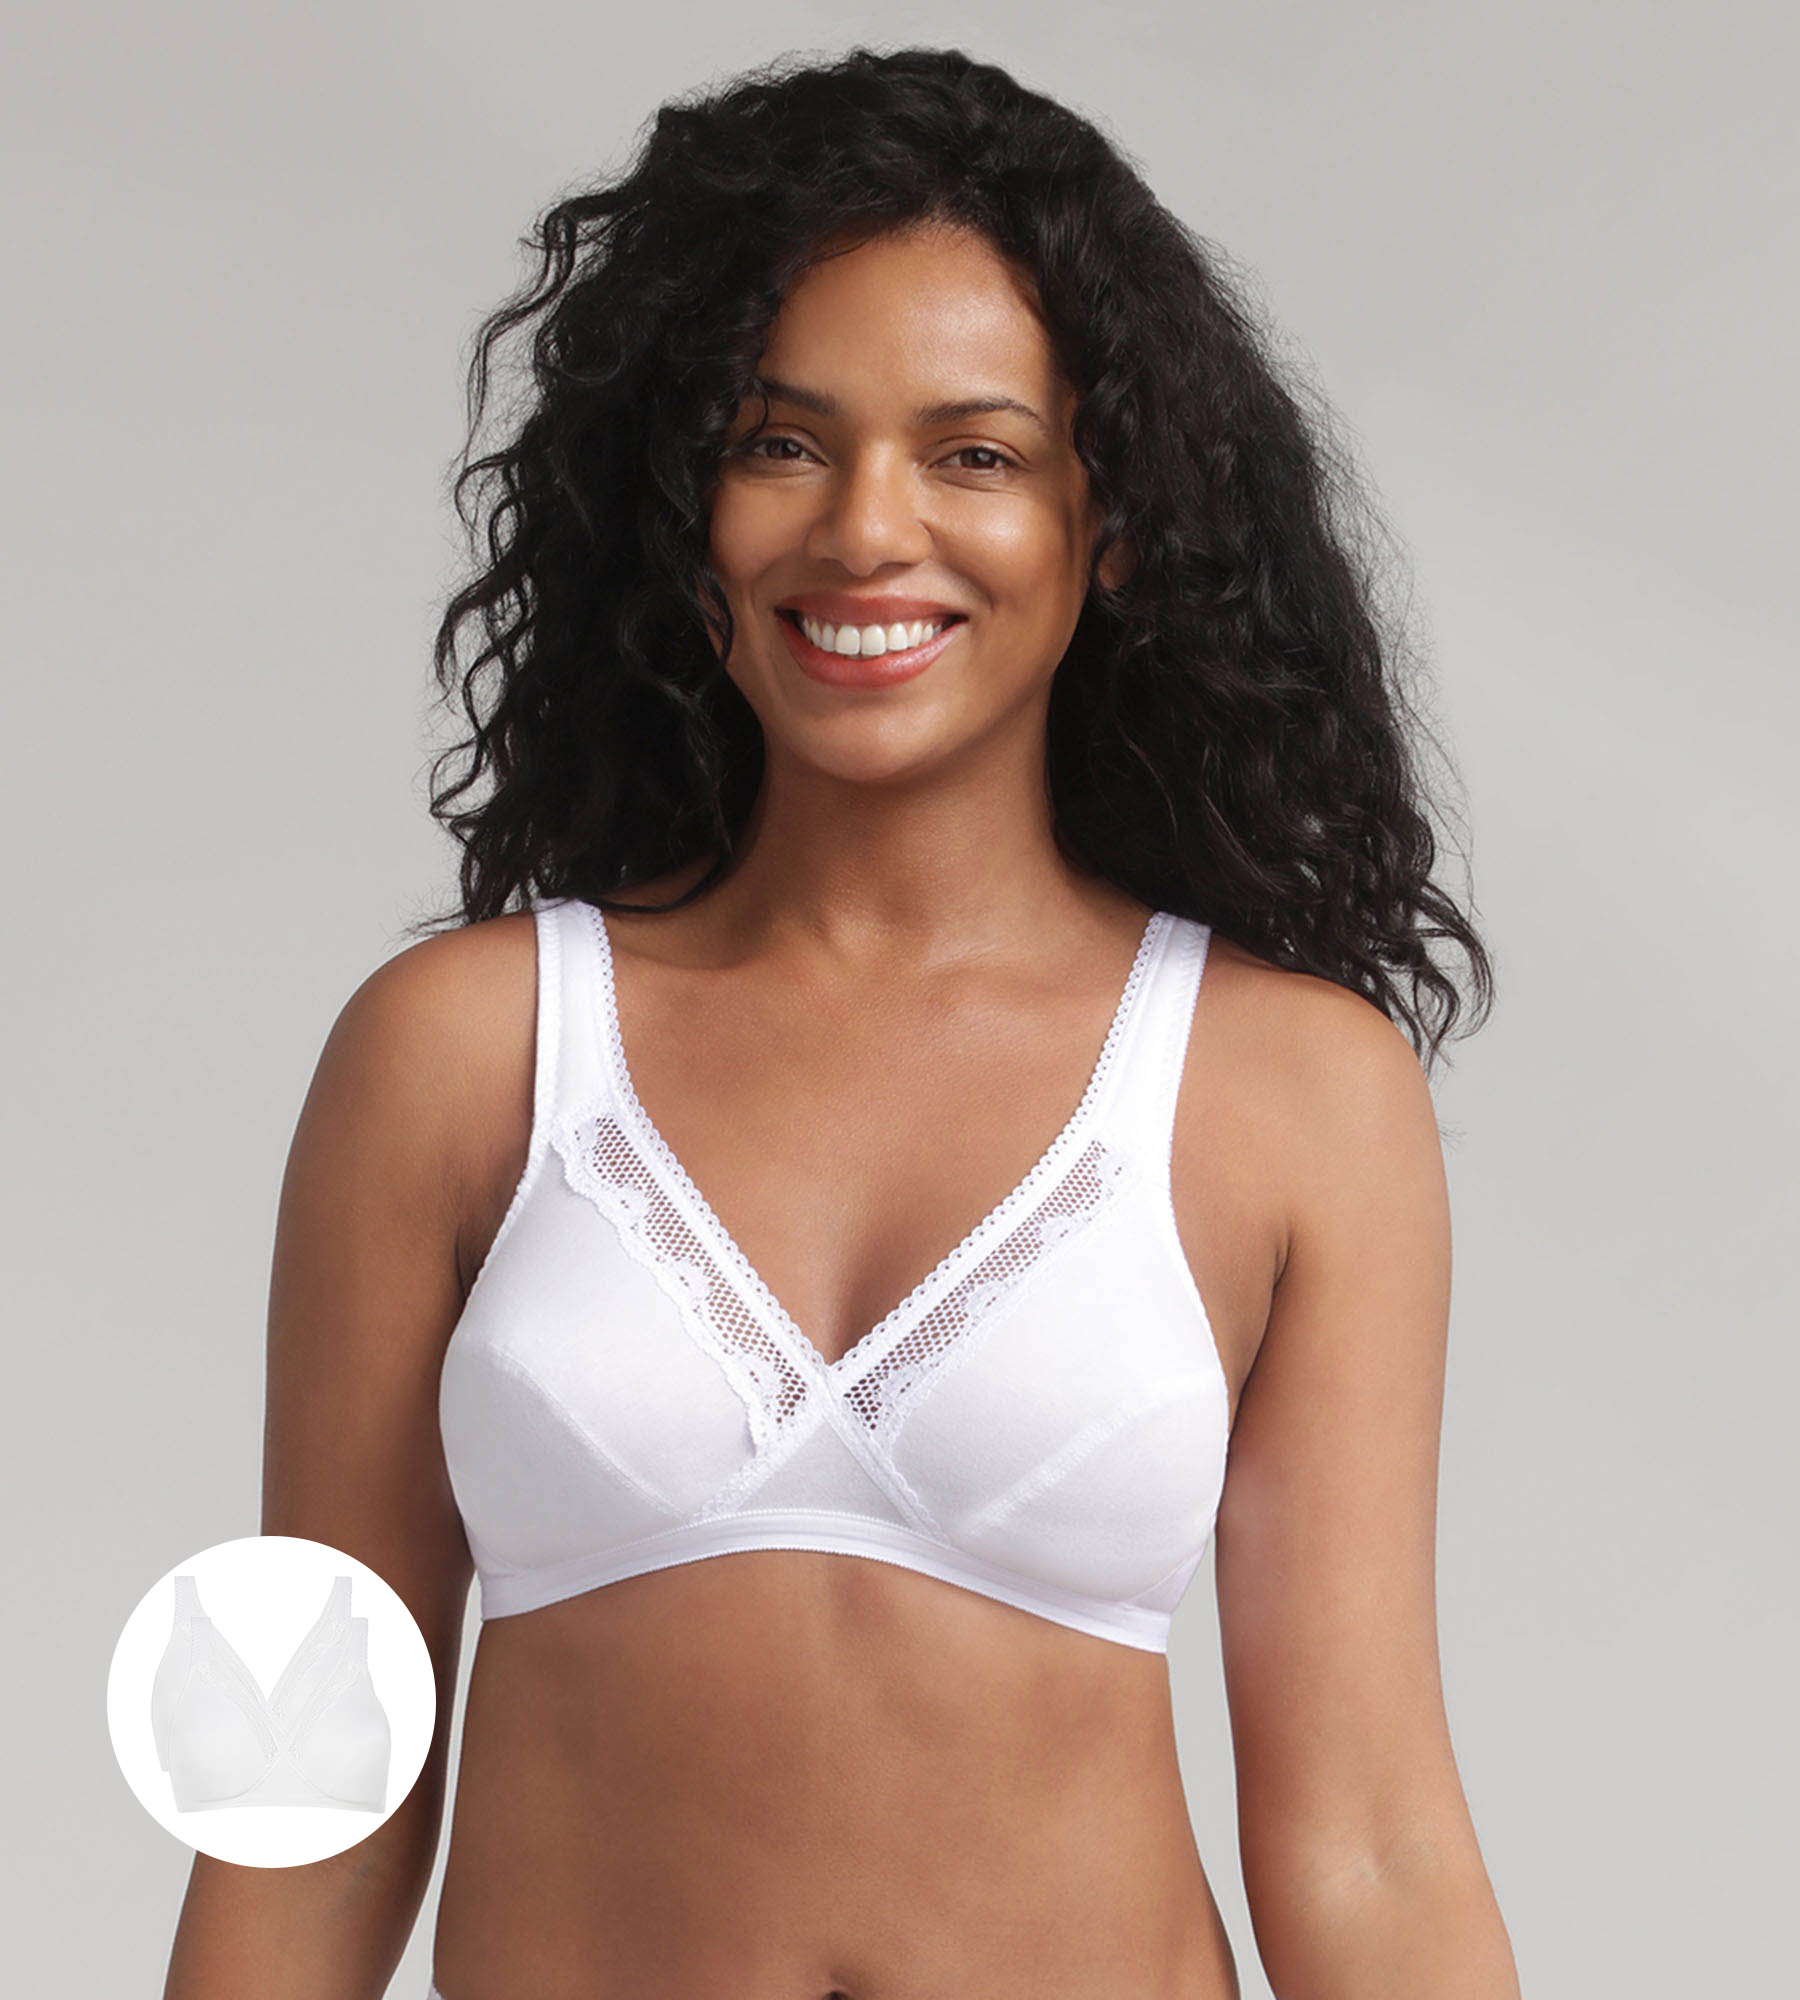 Pack of 2 non wired bras - Classic Cotton Support